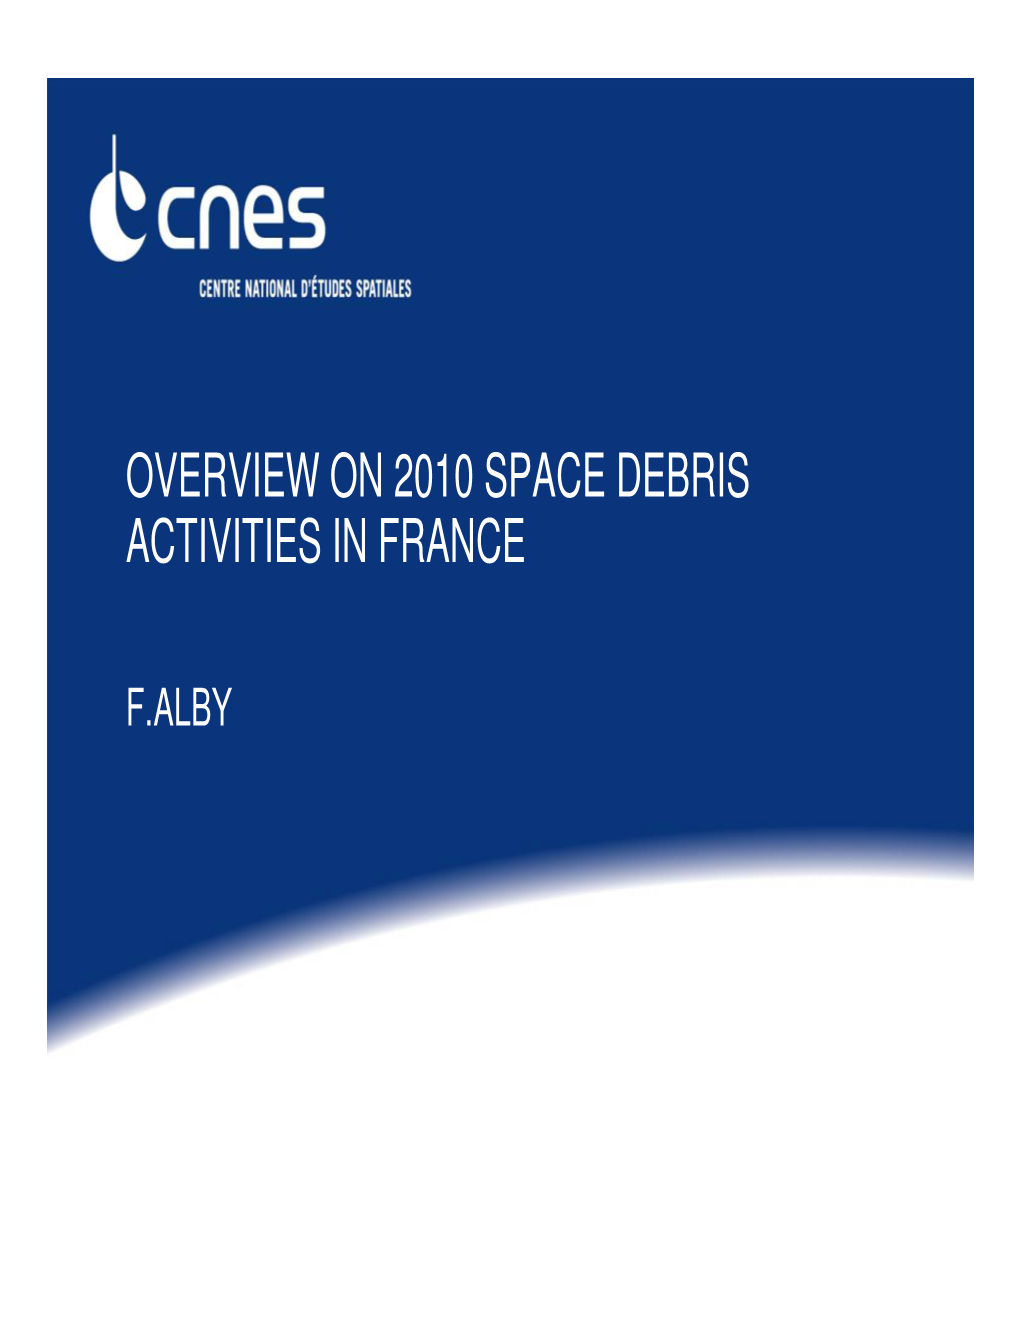 Overview on 2010 Space Debris Activities in France